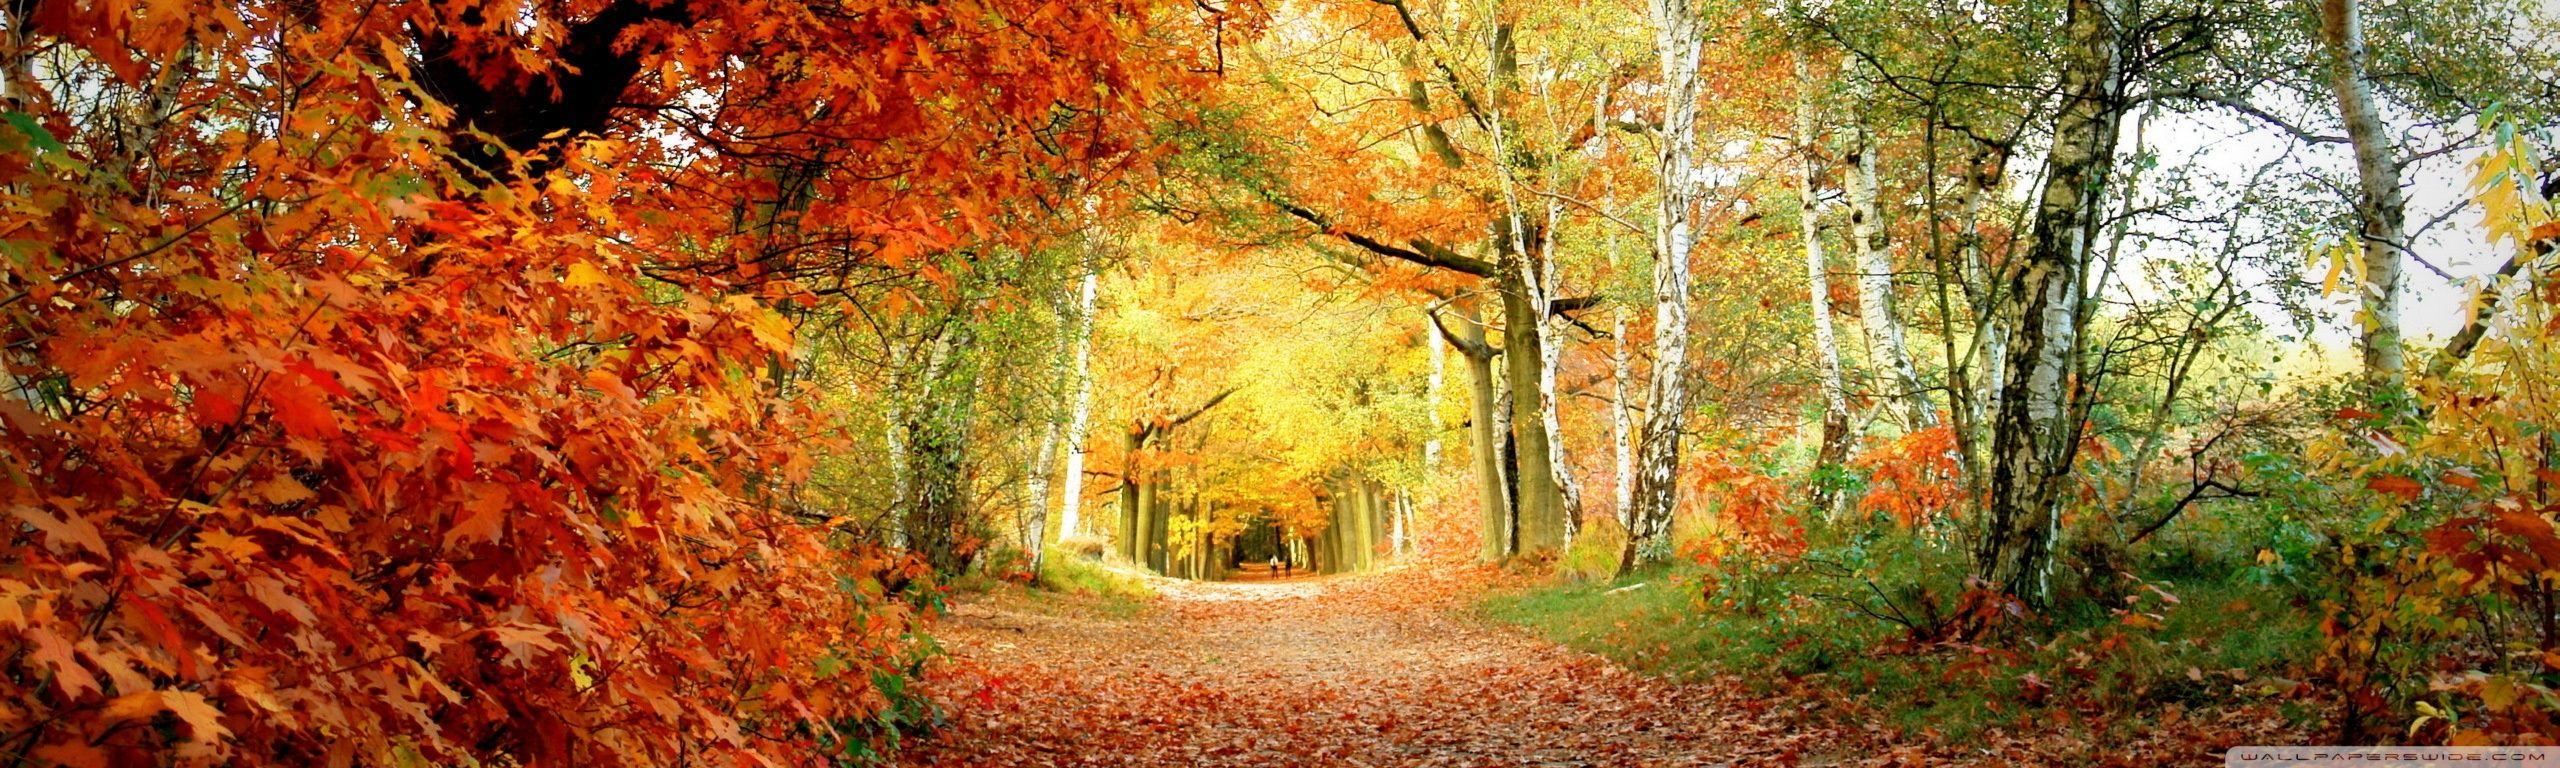 Dual Monitor Autumn Wallpapers Top Free Dual Monitor Autumn Backgrounds Wallpaperaccess